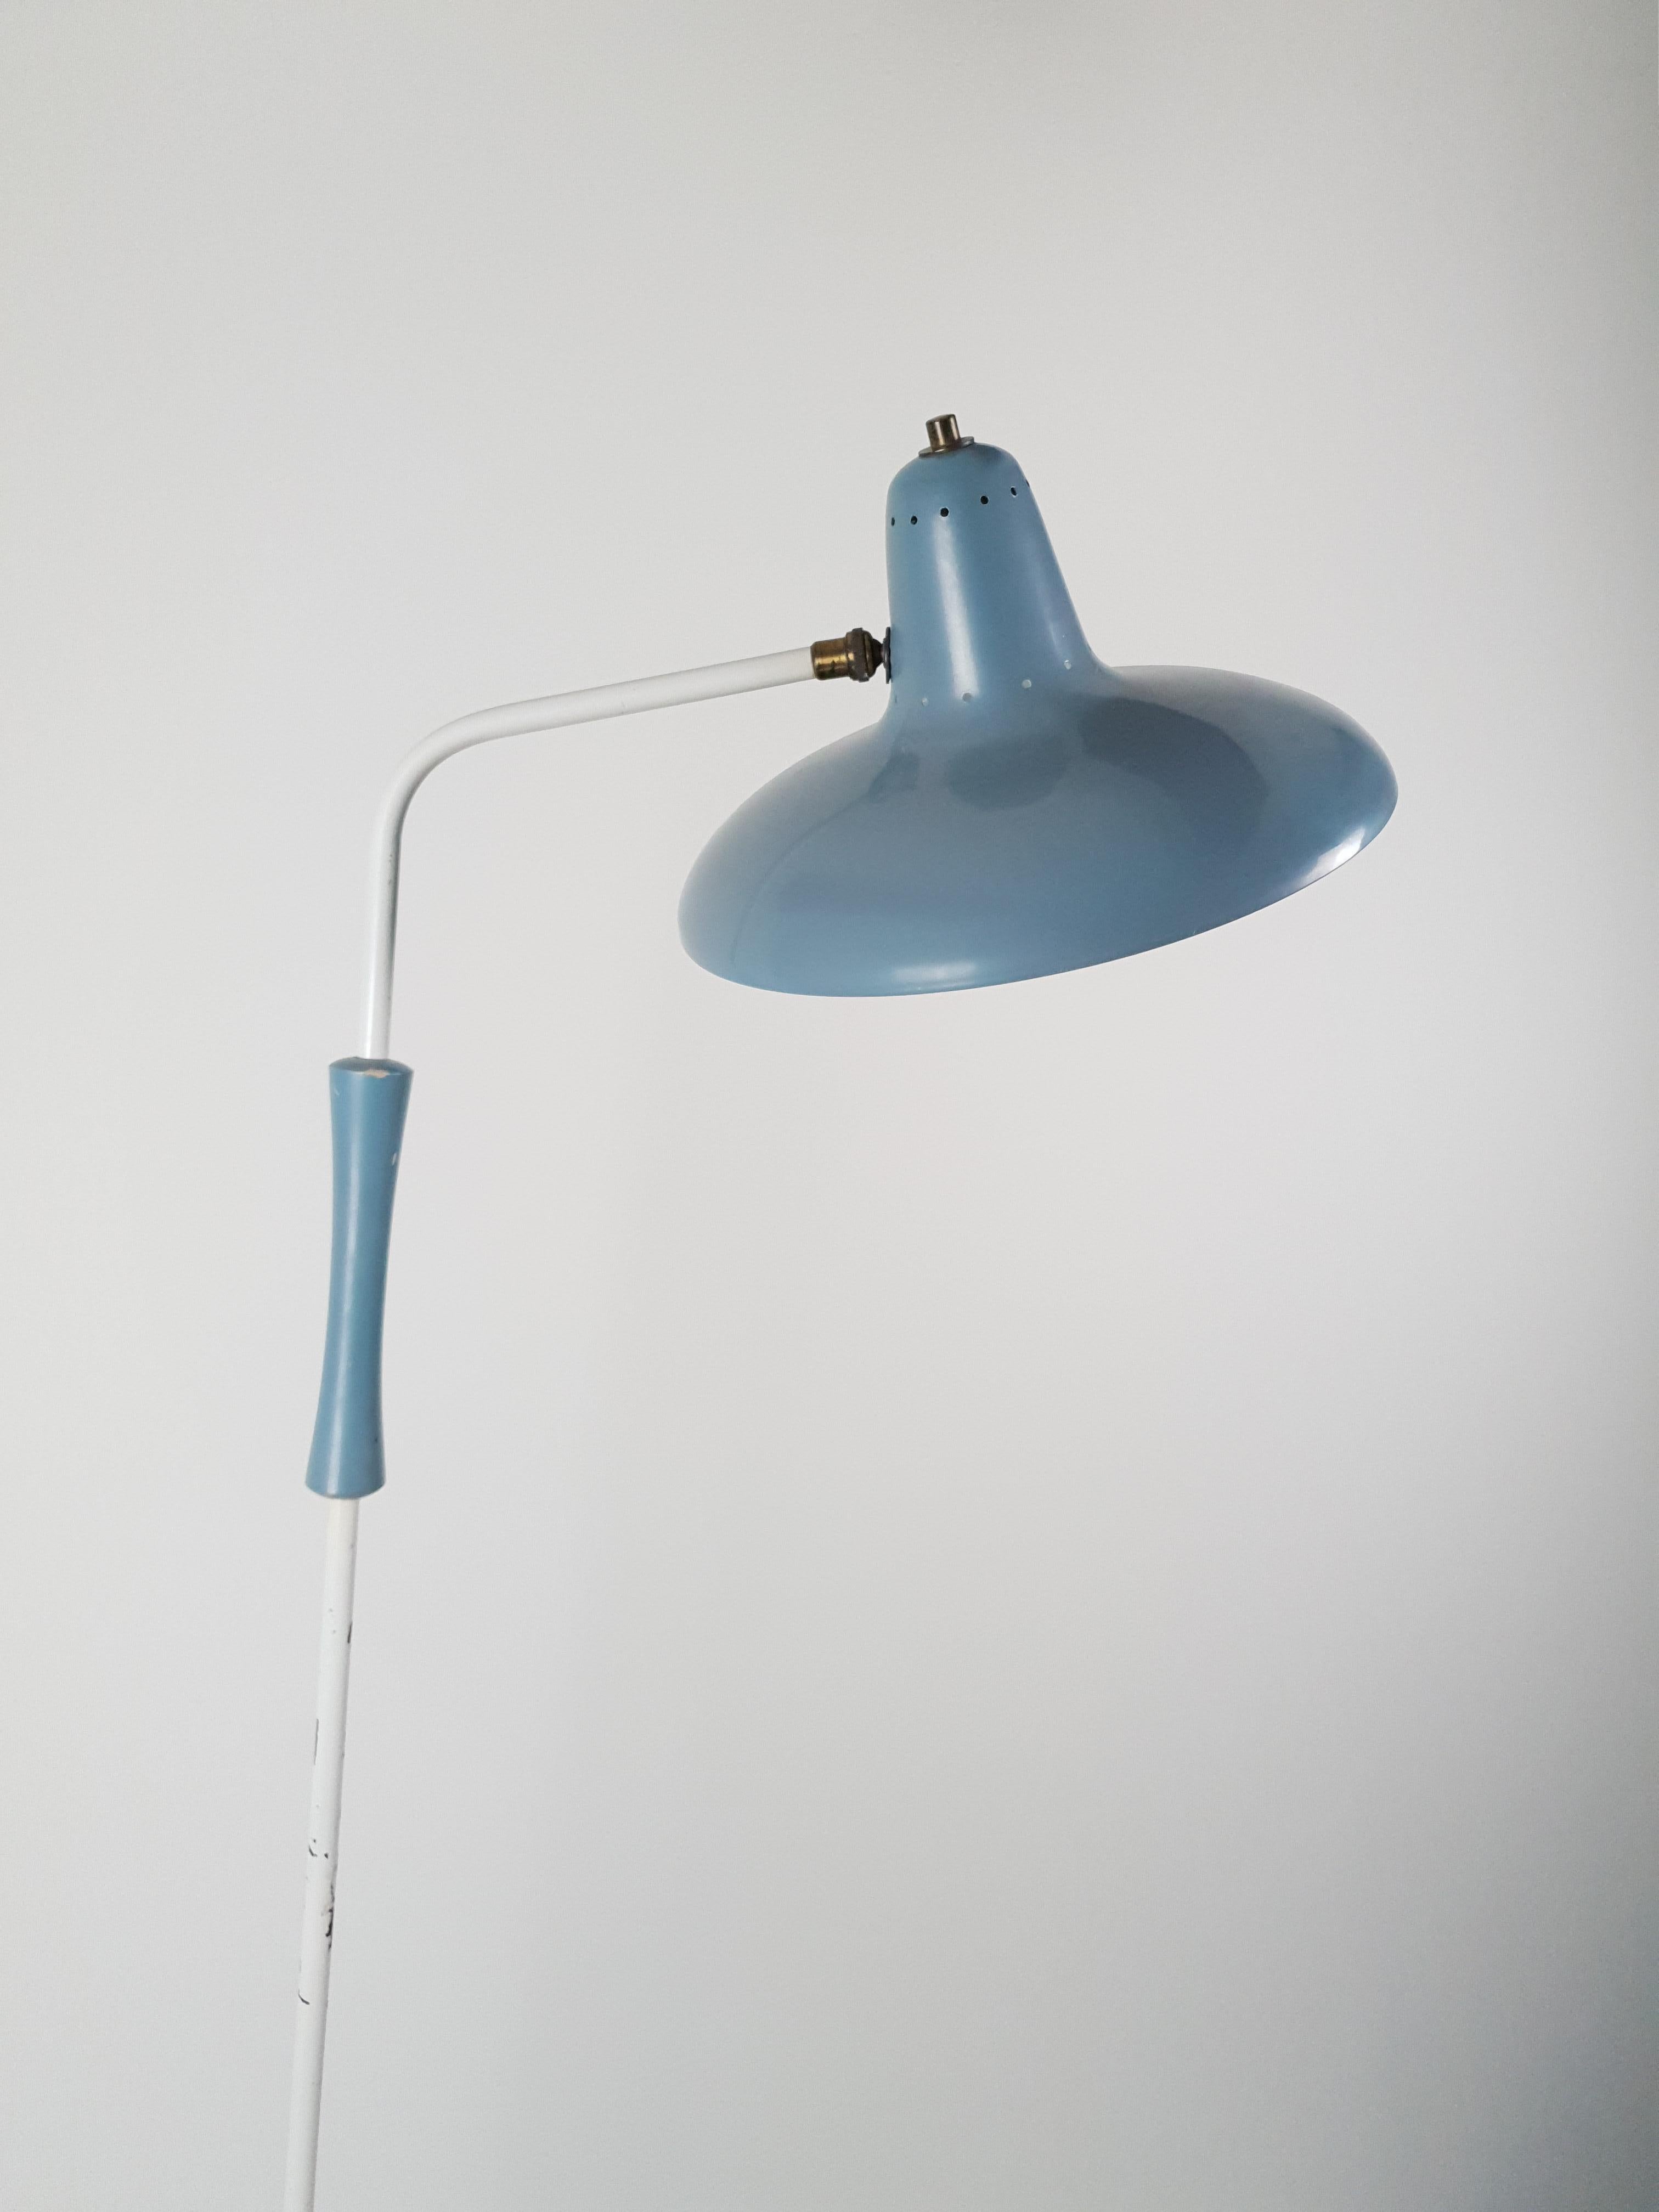 Lighting, floor lamp, H. fillekes, Artifort, The Netherlands, Mid century Modern

This magnificent floor lamp ‘Magneto’ was designed by H. Fillekes for Artiforte from 1954-1958.
This rare lamp was only produced for a short period.
The lamp has a